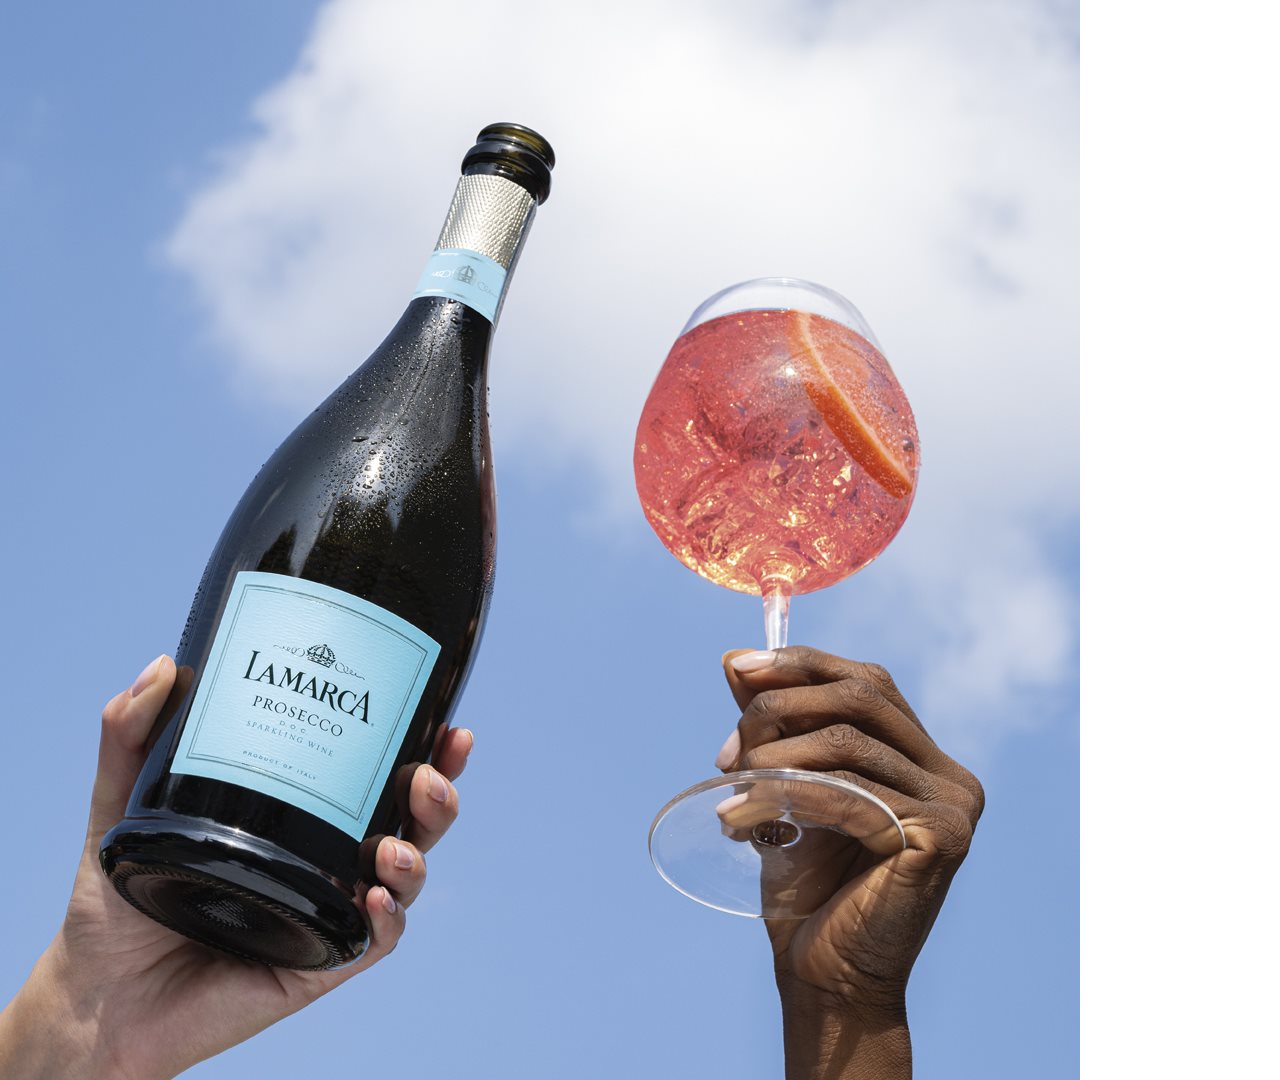 Bottle of LaMarca Prosecco and a filled glass raised to the sun.